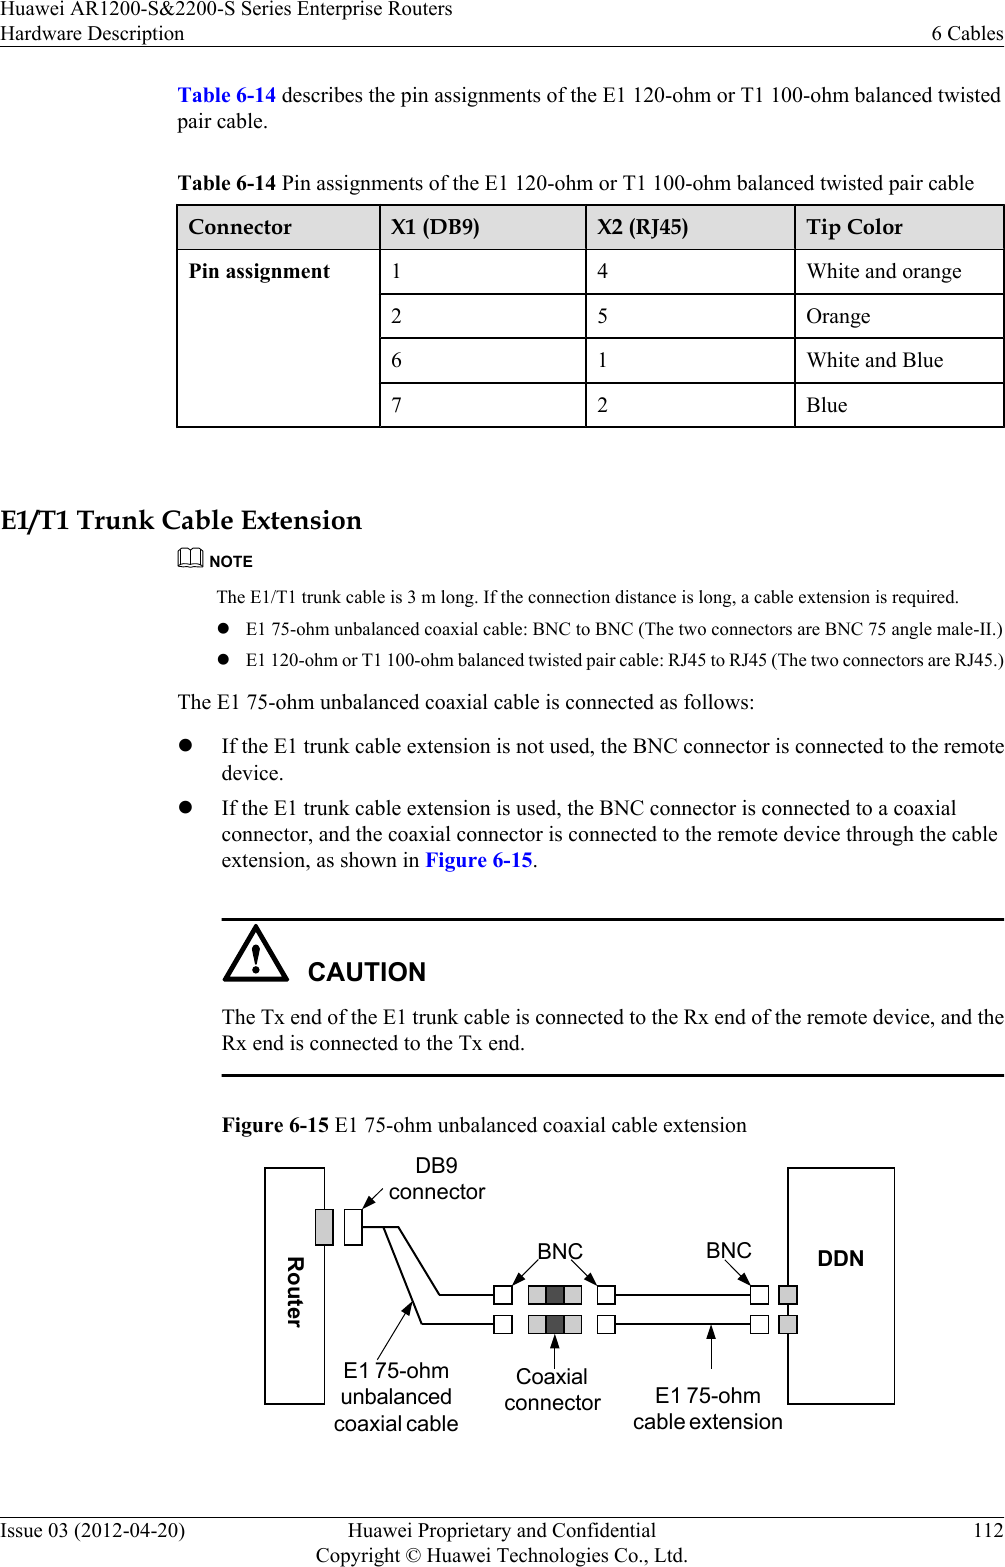 Table 6-14 describes the pin assignments of the E1 120-ohm or T1 100-ohm balanced twistedpair cable.Table 6-14 Pin assignments of the E1 120-ohm or T1 100-ohm balanced twisted pair cableConnector X1 (DB9) X2 (RJ45) Tip ColorPin assignment 1 4 White and orange2 5 Orange6 1 White and Blue7 2 Blue E1/T1 Trunk Cable ExtensionNOTEThe E1/T1 trunk cable is 3 m long. If the connection distance is long, a cable extension is required.lE1 75-ohm unbalanced coaxial cable: BNC to BNC (The two connectors are BNC 75 angle male-II.)lE1 120-ohm or T1 100-ohm balanced twisted pair cable: RJ45 to RJ45 (The two connectors are RJ45.)The E1 75-ohm unbalanced coaxial cable is connected as follows:lIf the E1 trunk cable extension is not used, the BNC connector is connected to the remotedevice.lIf the E1 trunk cable extension is used, the BNC connector is connected to a coaxialconnector, and the coaxial connector is connected to the remote device through the cableextension, as shown in Figure 6-15.CAUTIONThe Tx end of the E1 trunk cable is connected to the Rx end of the remote device, and theRx end is connected to the Tx end.Figure 6-15 E1 75-ohm unbalanced coaxial cable extensionRouterDB9connectorBNCE1 75-ohmunbalancedcoaxial cableCoaxialconnector E1 75-ohmcable extensionDDNBNCHuawei AR1200-S&amp;2200-S Series Enterprise RoutersHardware Description 6 CablesIssue 03 (2012-04-20) Huawei Proprietary and ConfidentialCopyright © Huawei Technologies Co., Ltd.112